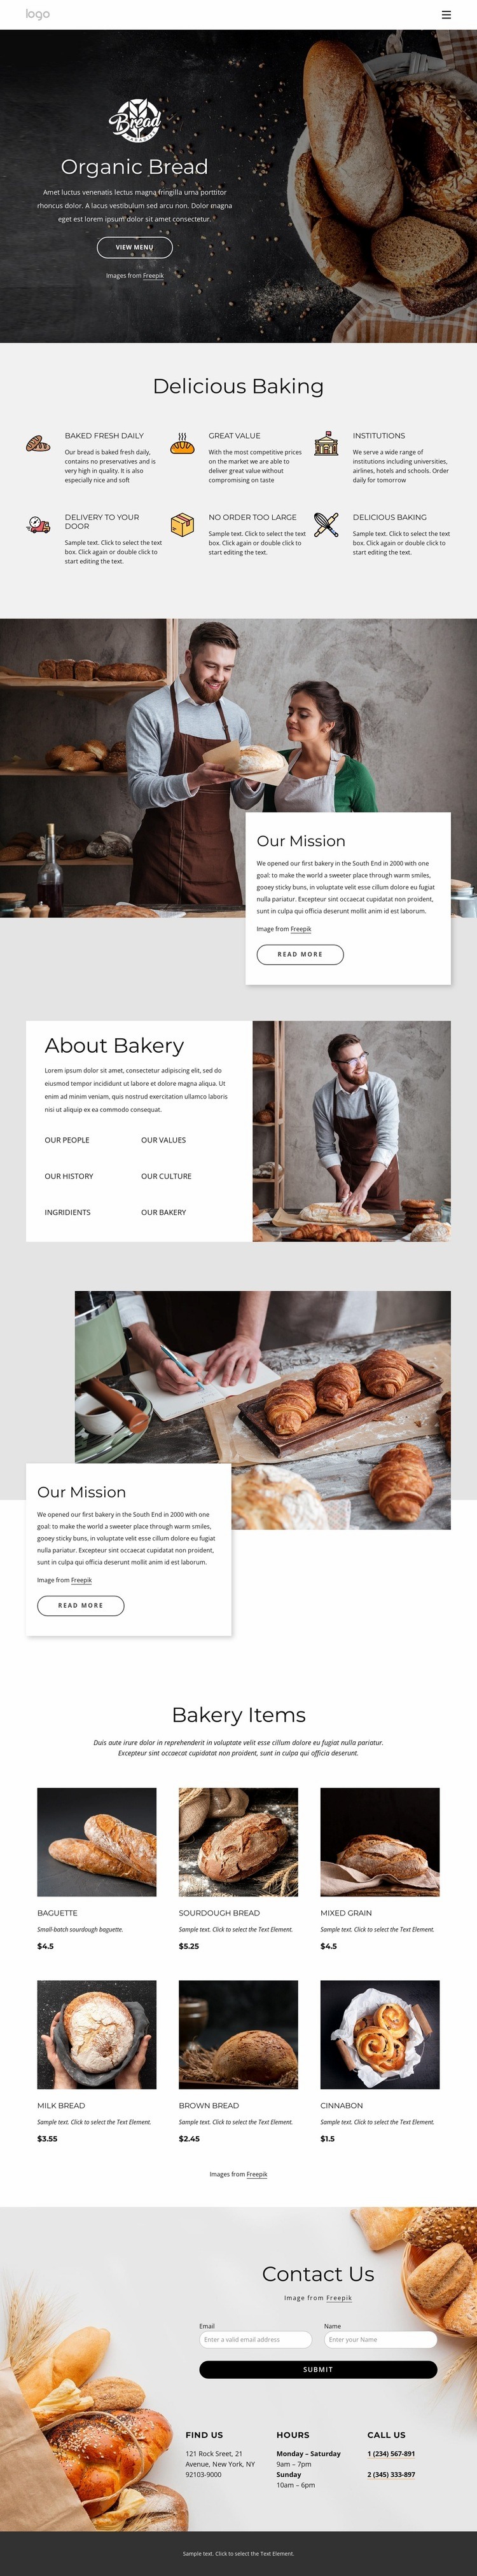 Bagels, buns, rolls, biscuits and loaf breads Squarespace Template Alternative